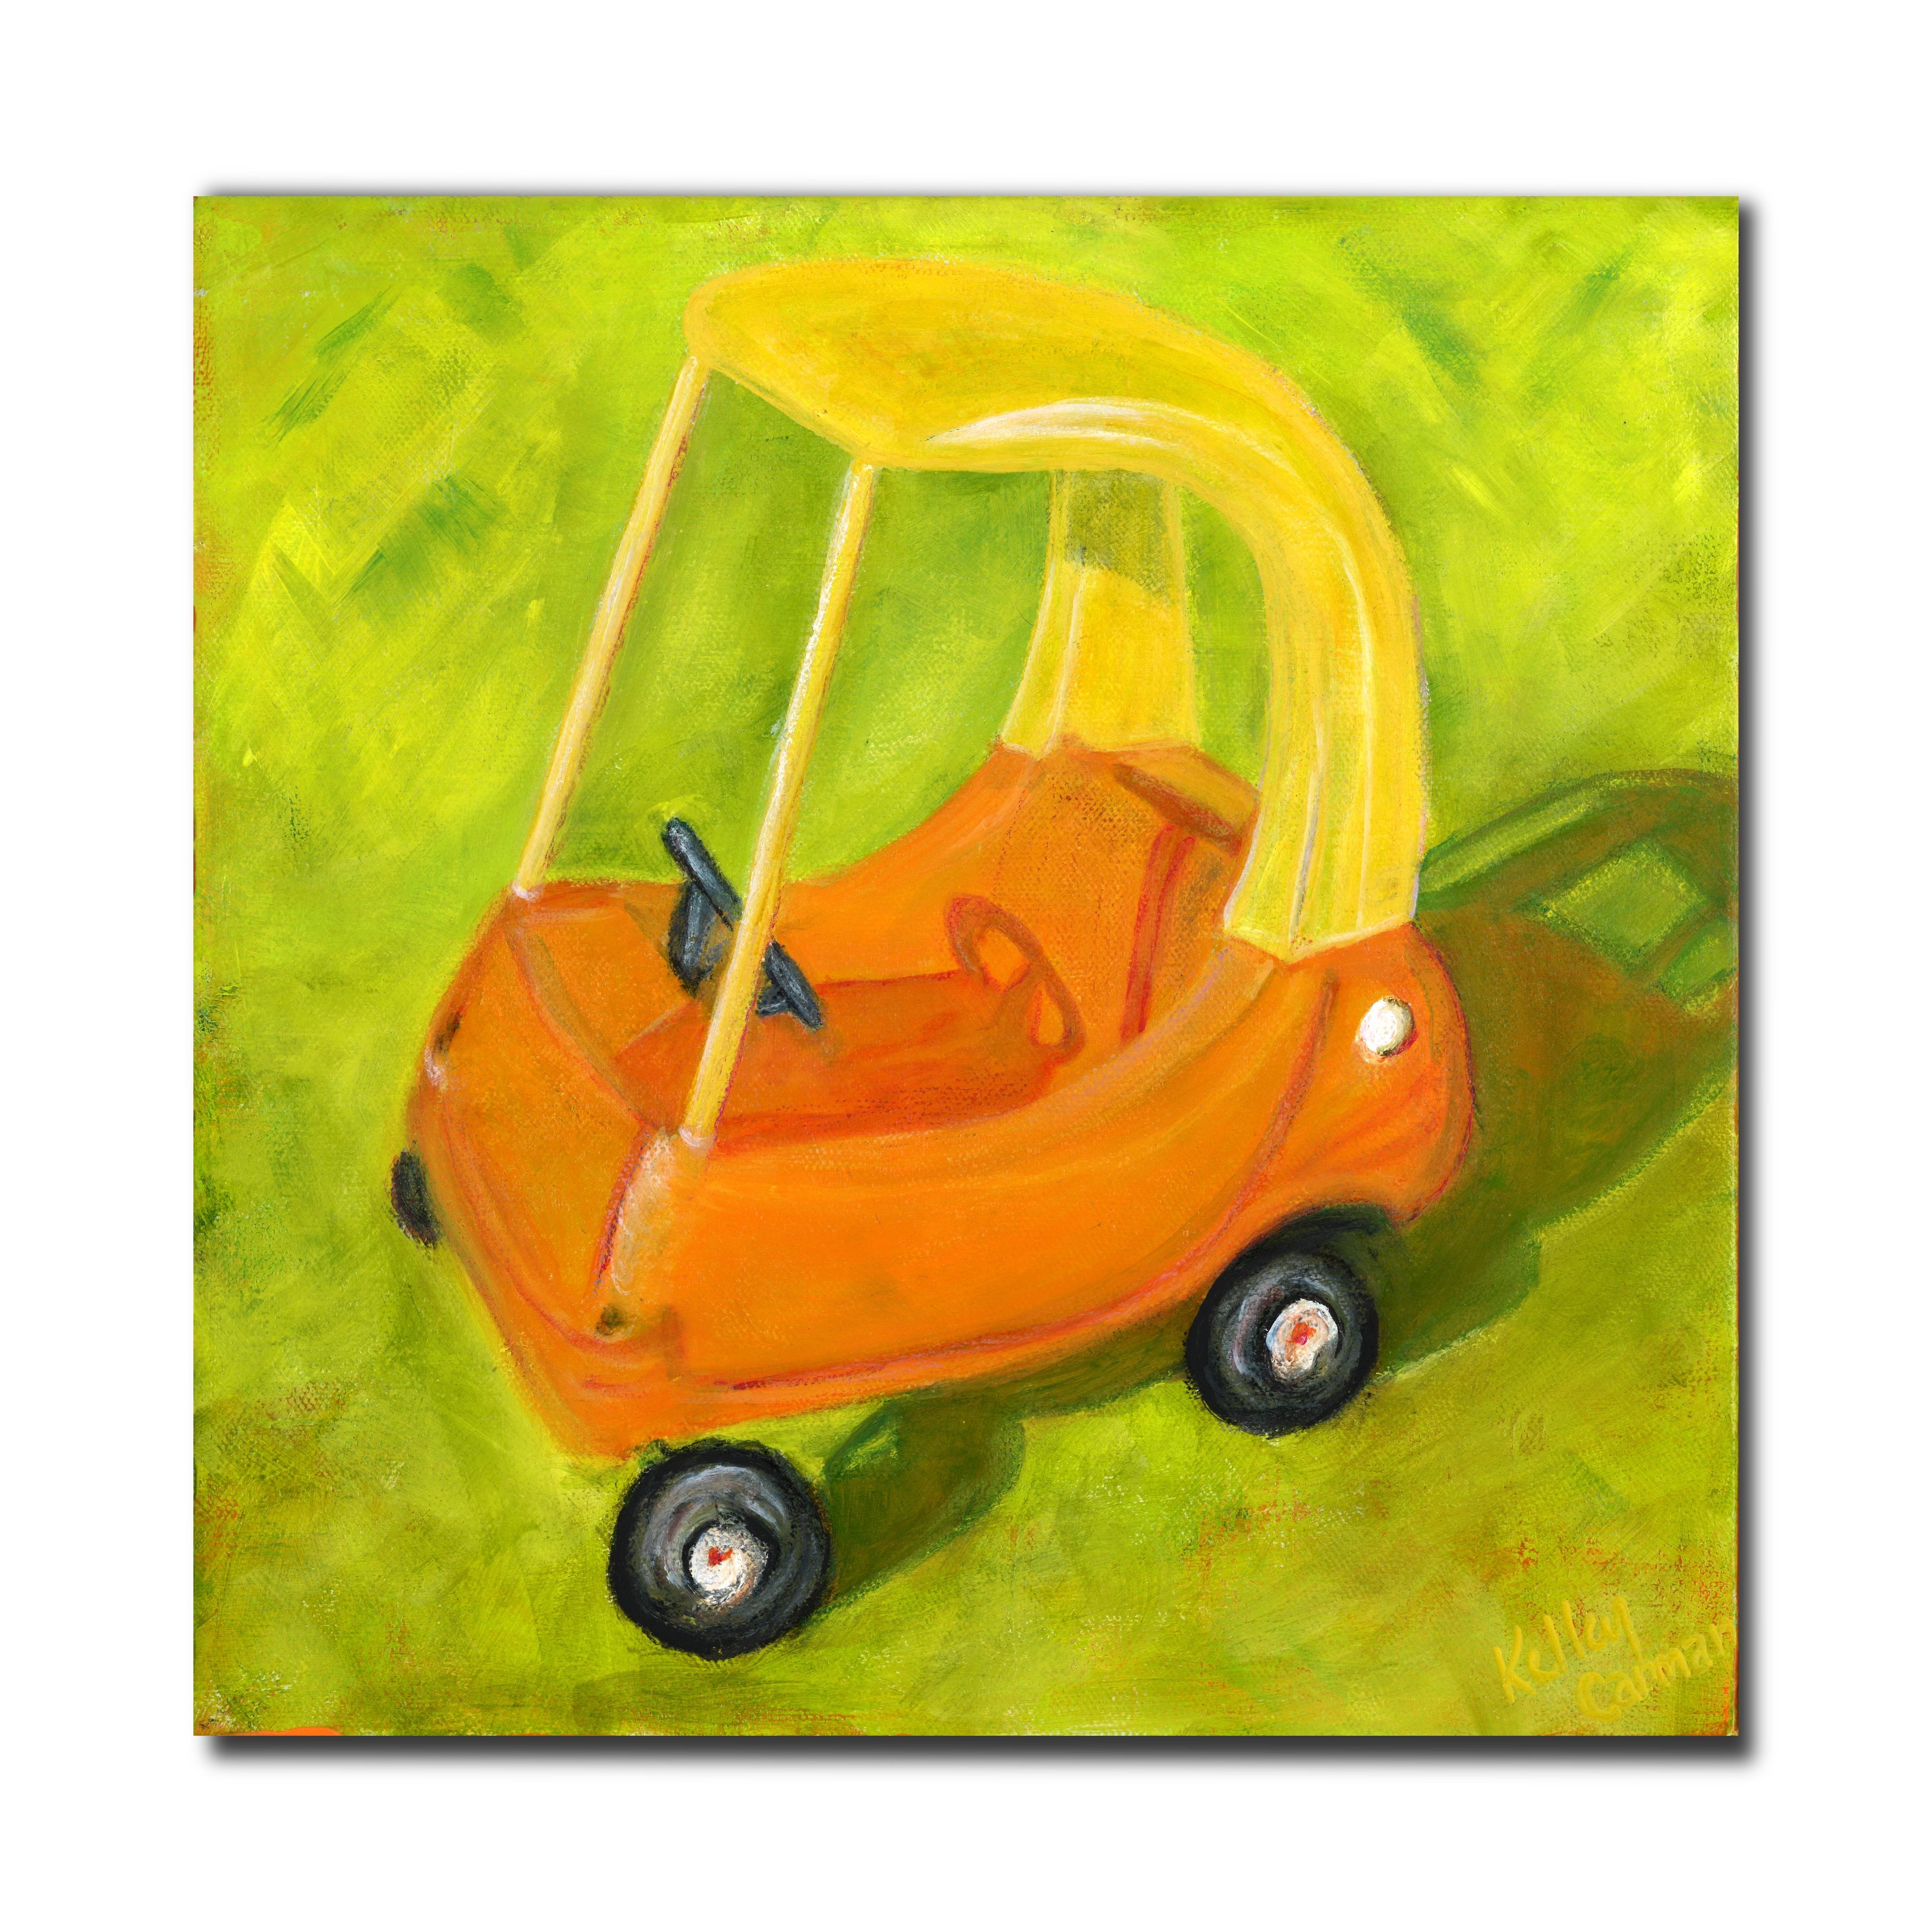 First Car (Figurative, Cozy, Coupe, Yellow, Orange, Green, Car) - Modern Painting by Kelley Carman